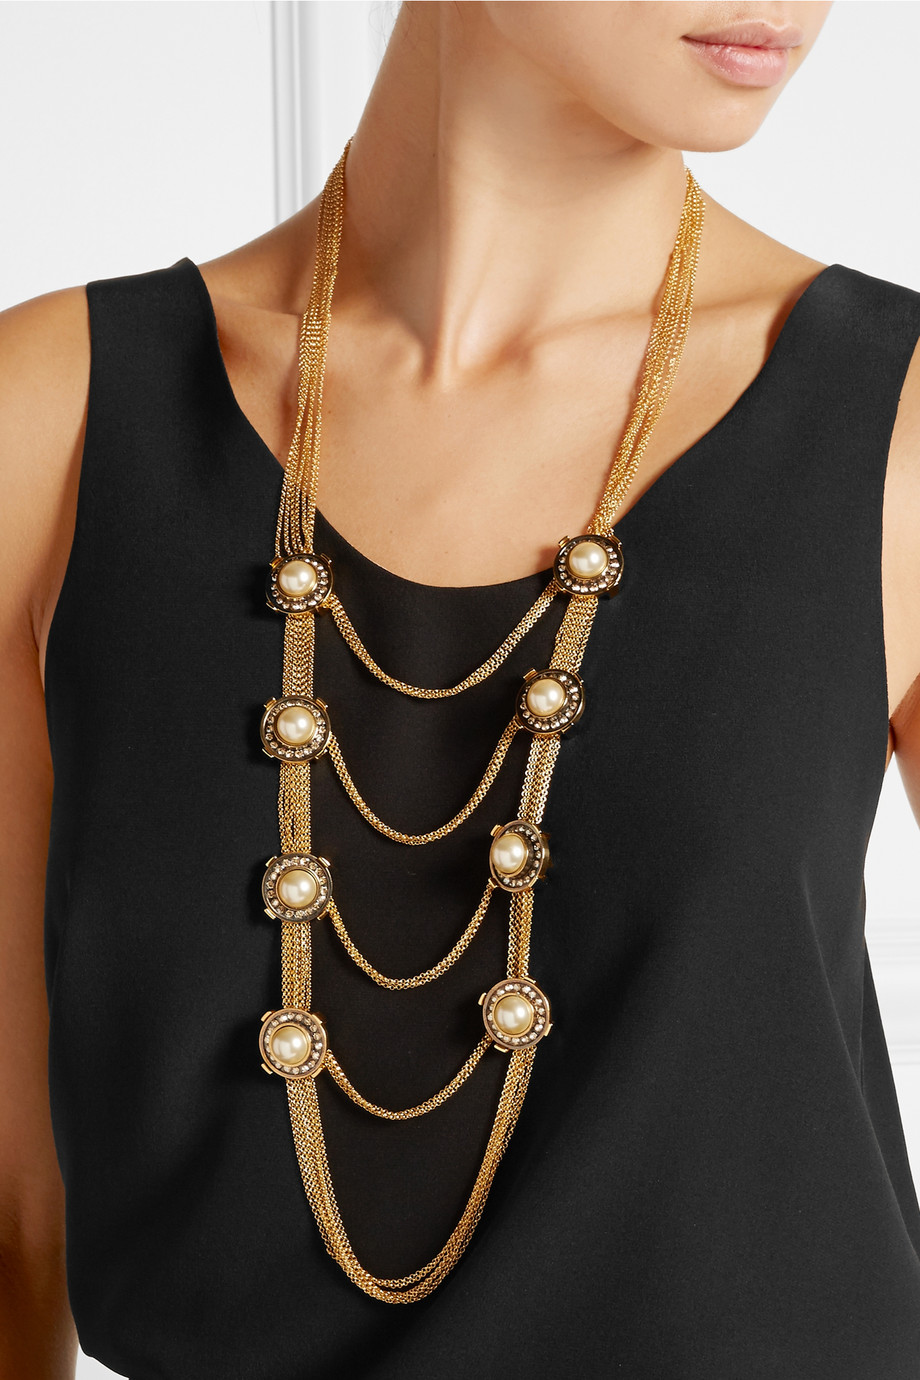 necklace for elegant outfit